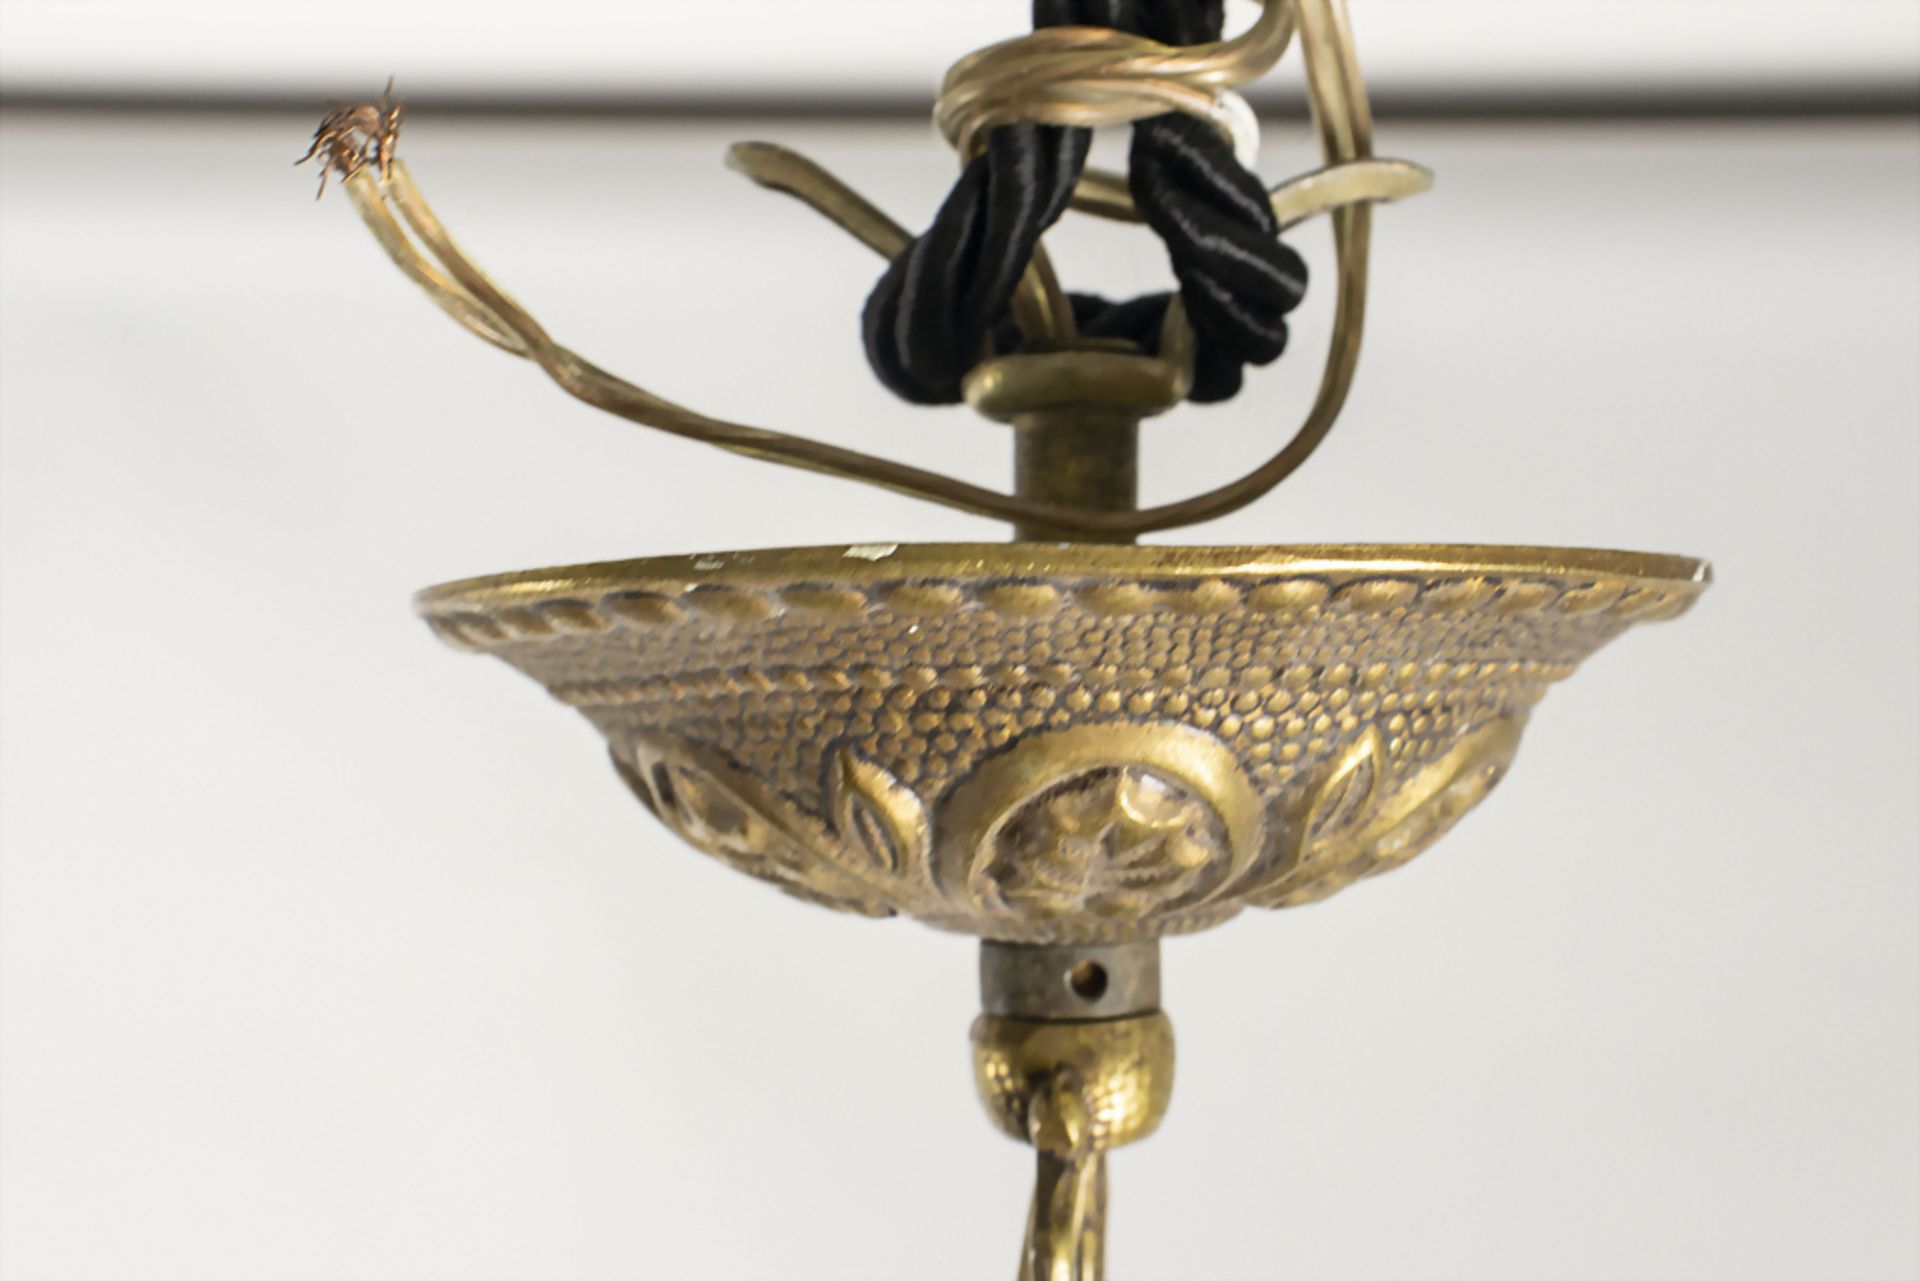 Flurlampe / A hallway ceiling lamp, Frankreich, Anfang 20. Jh. - Image 4 of 5